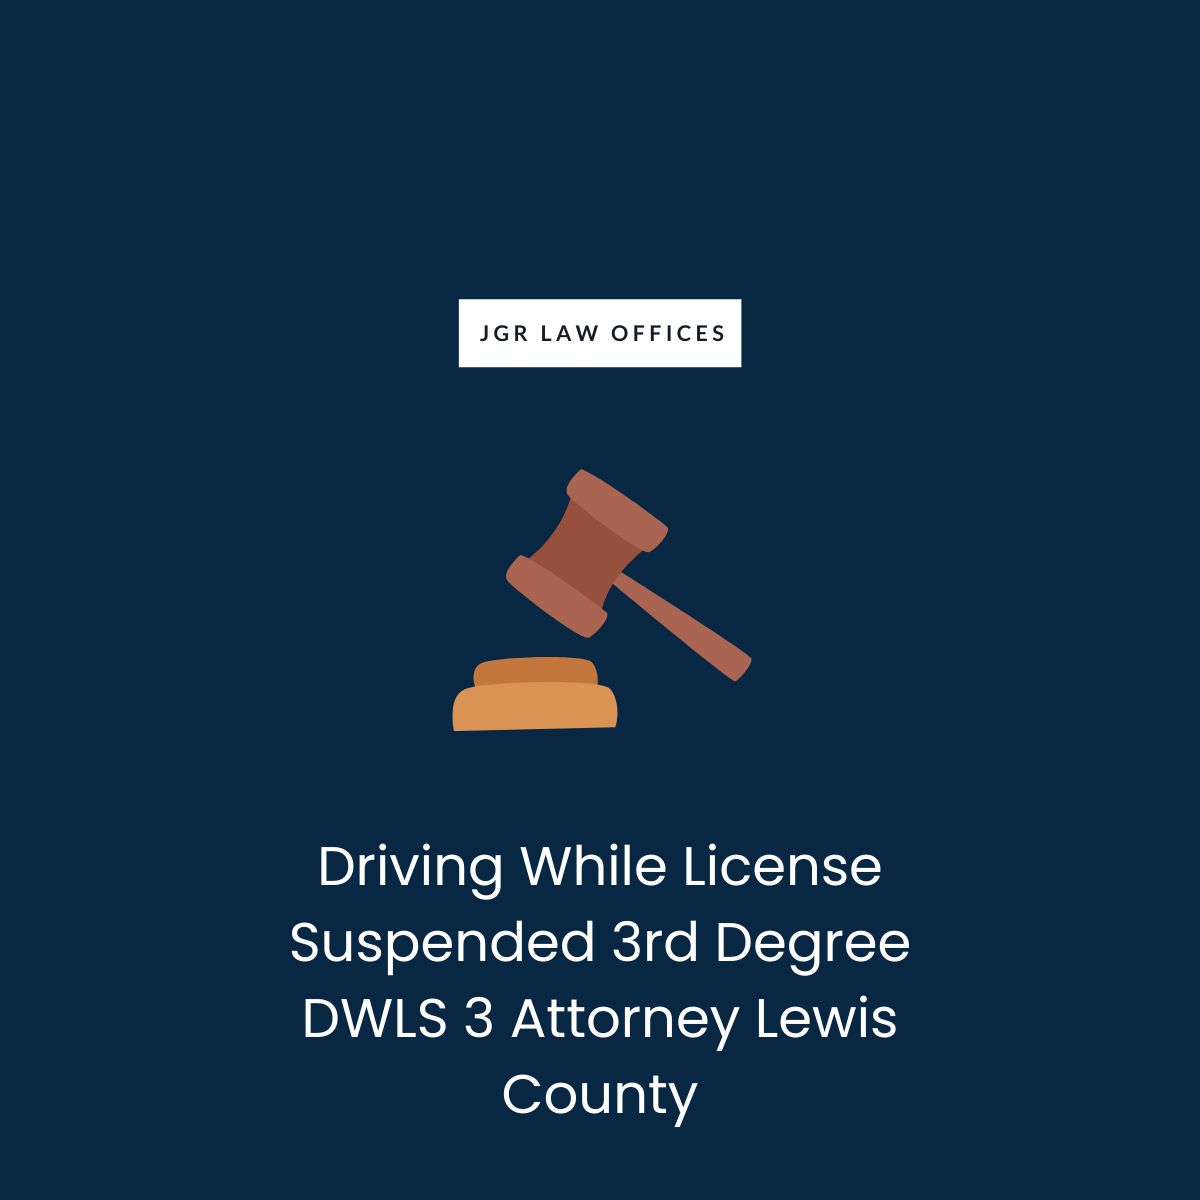 Driving While License Suspended 3rd Degree DWLS 3 Attorney Lewis County